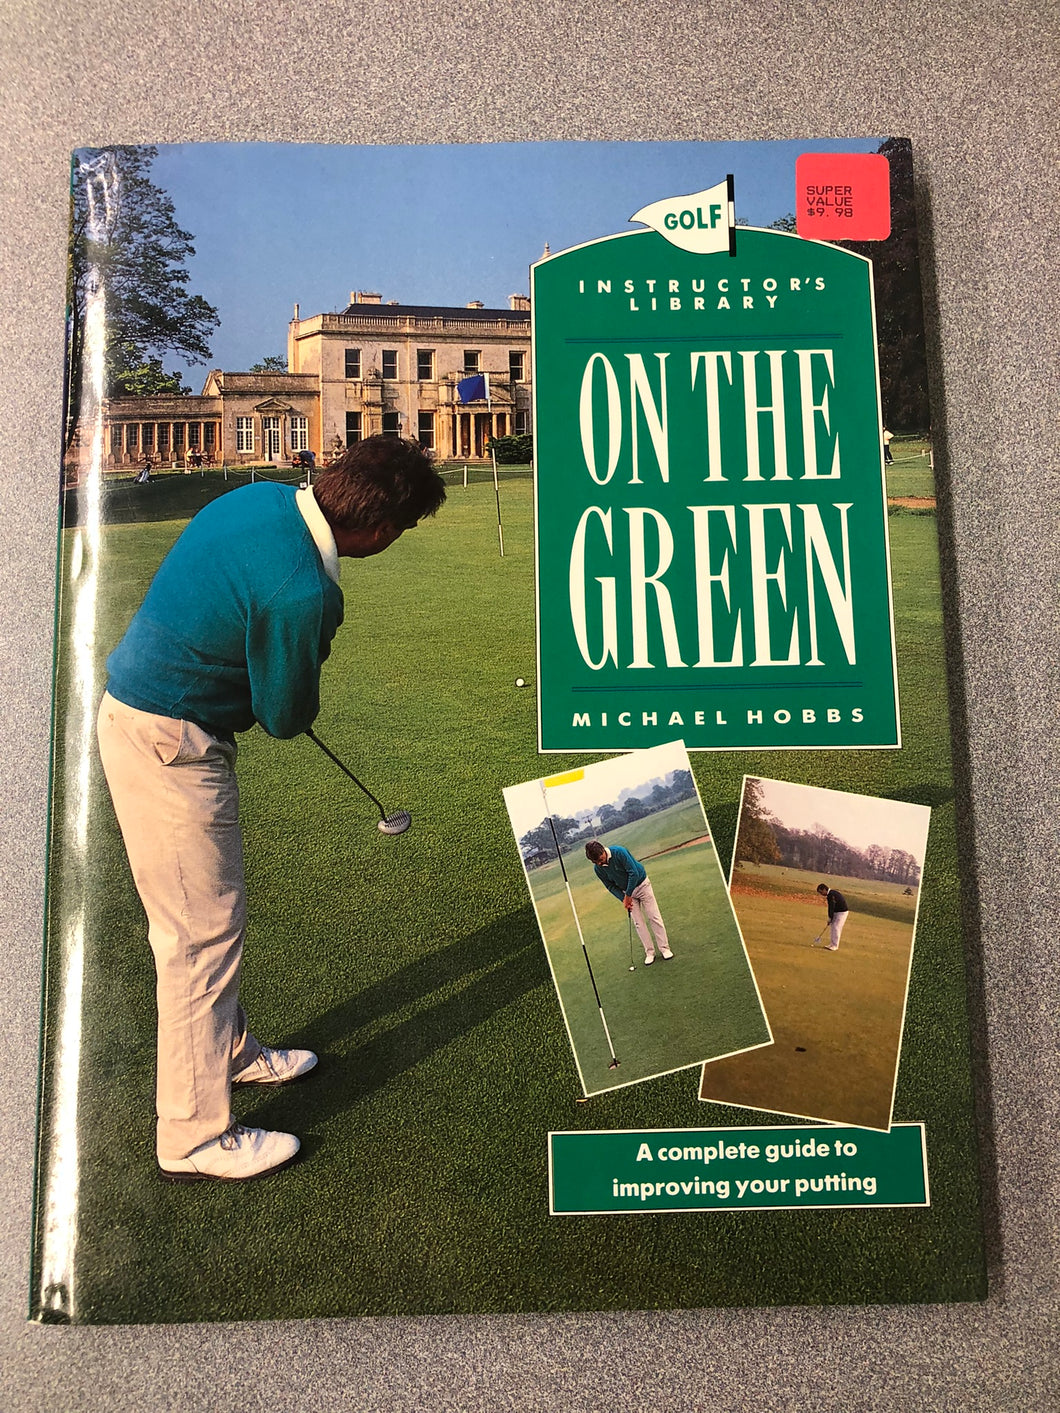 Golf Instructor's Library: On the Green: a Complete Guide to Improving Your Putting, Hobbs, Michael [1991] OU 7/22